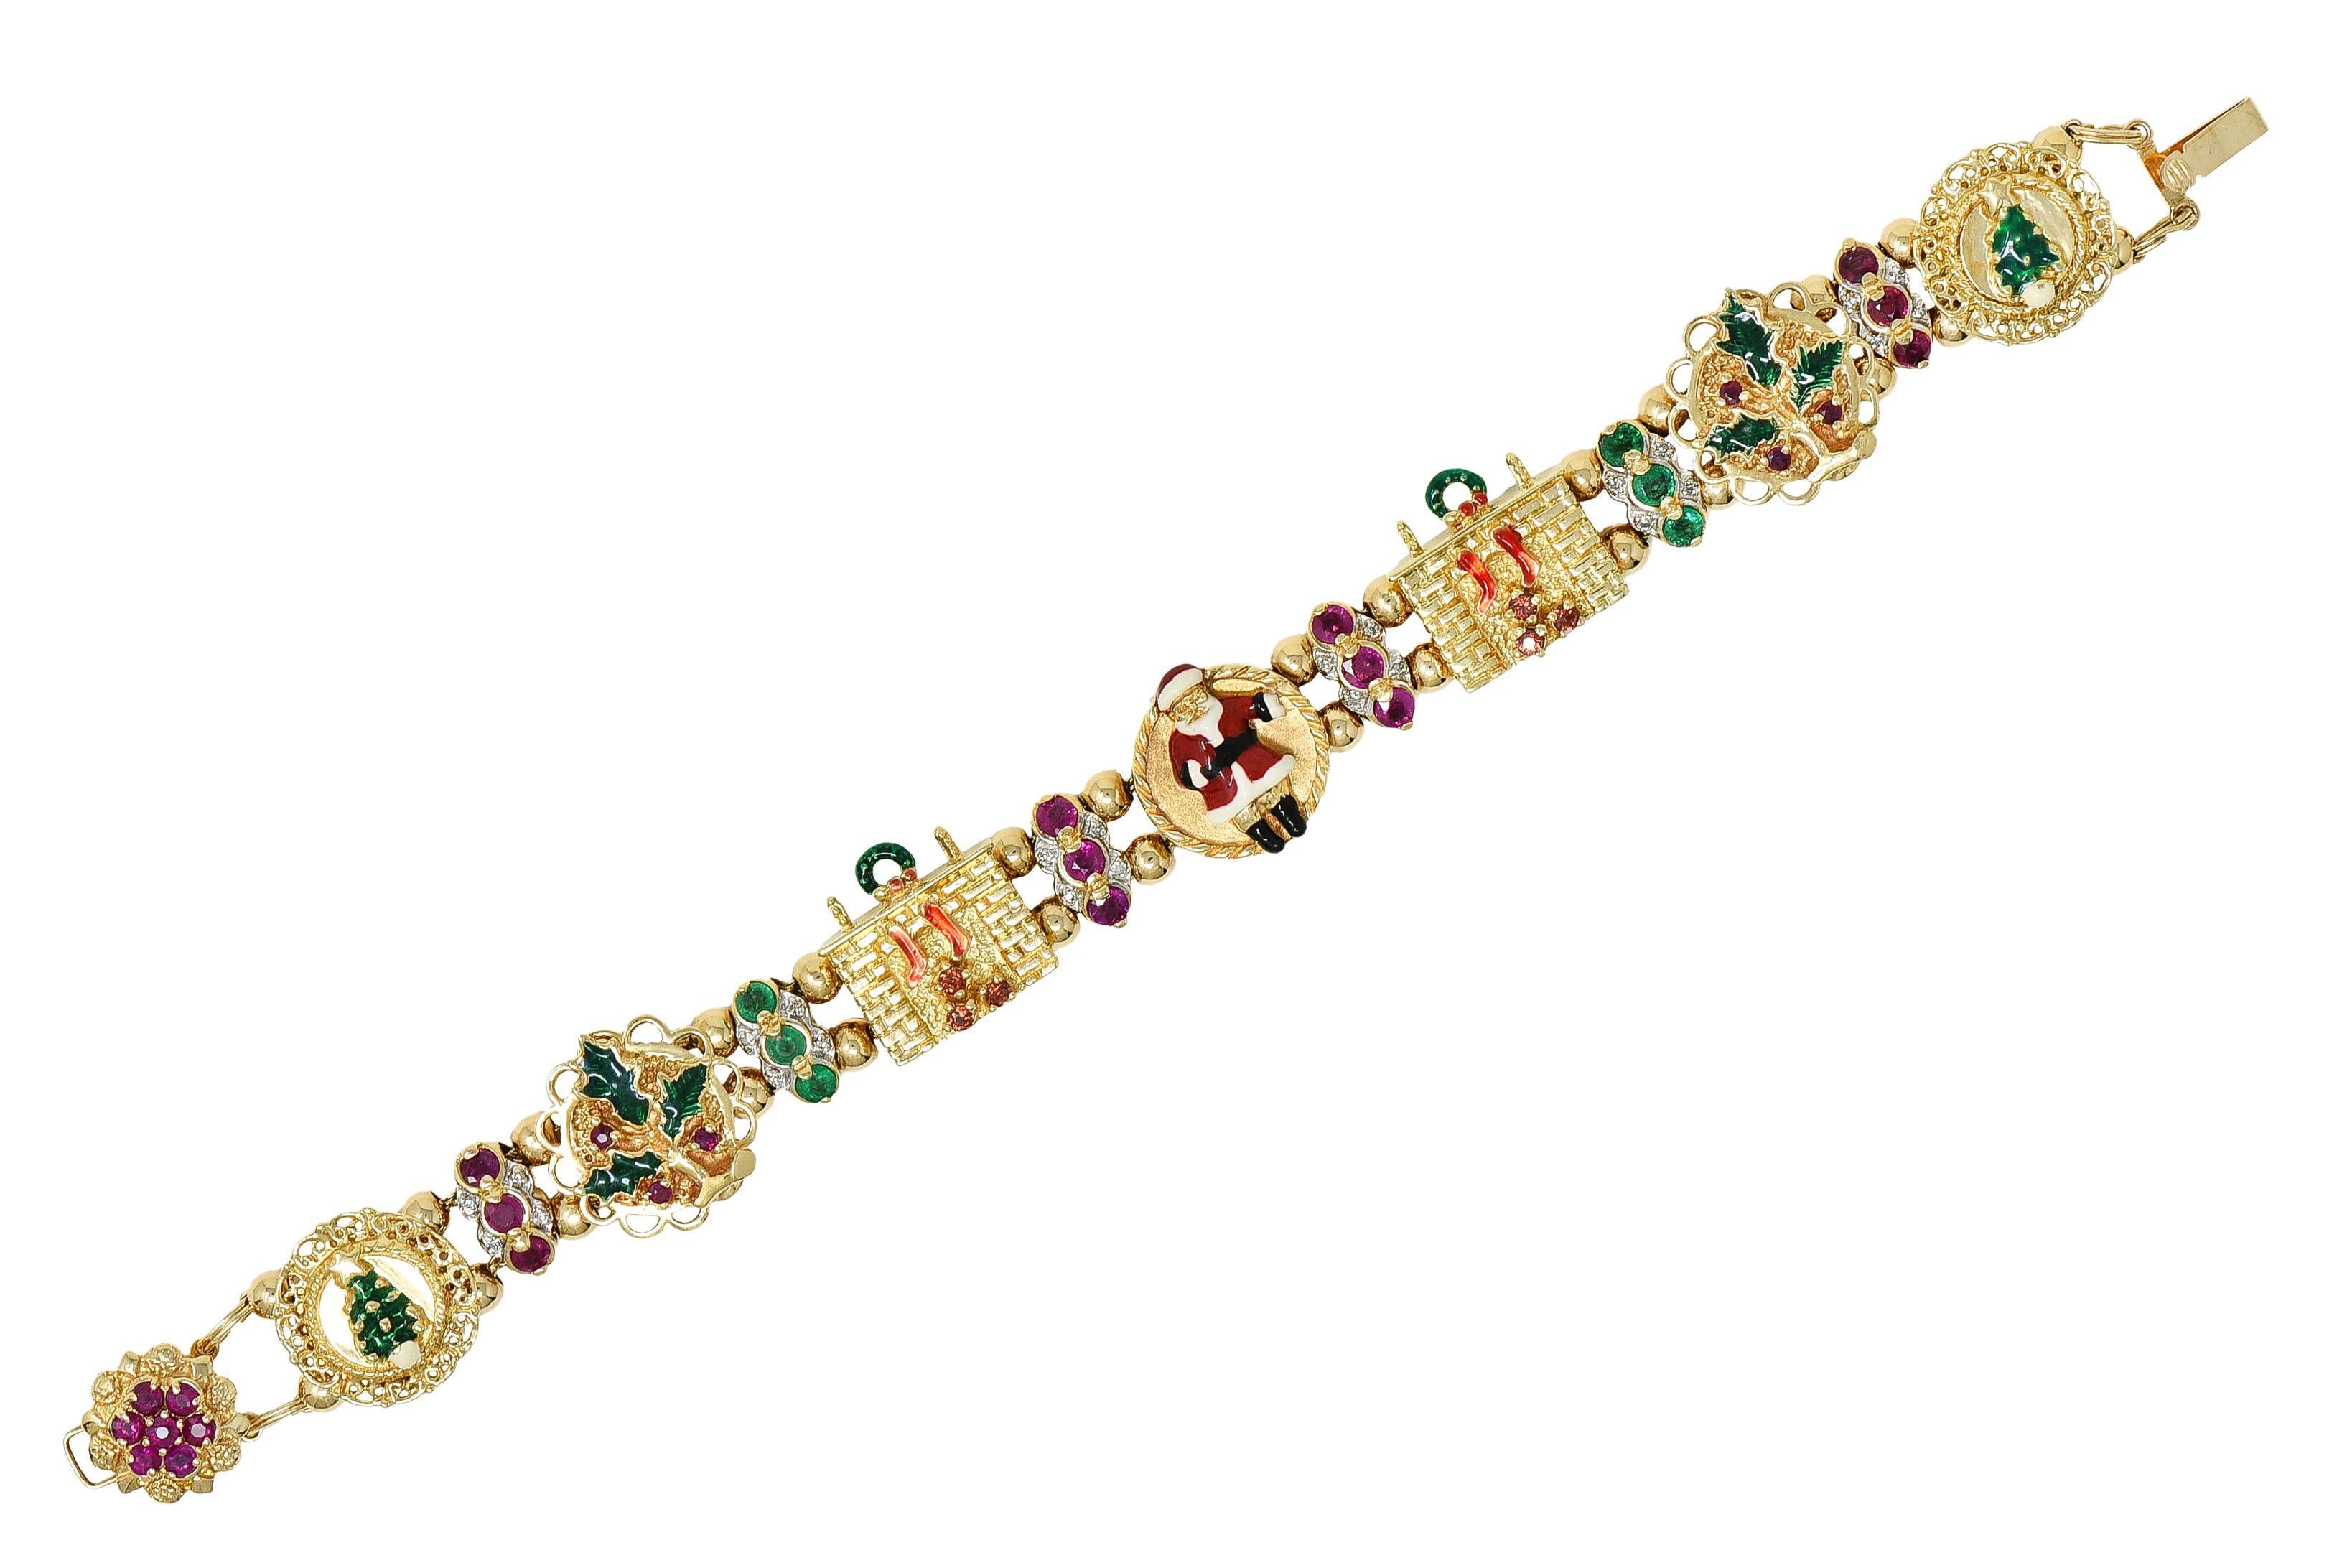 Designed as a slide bracelet comprised of round spacer beads with gemstone and enamel stations
Enamel stations are designed as gold wreaths, Christmas trees, chimneys, holly, and a Santa
Glossed with transparent green, red, white, and black enamel -